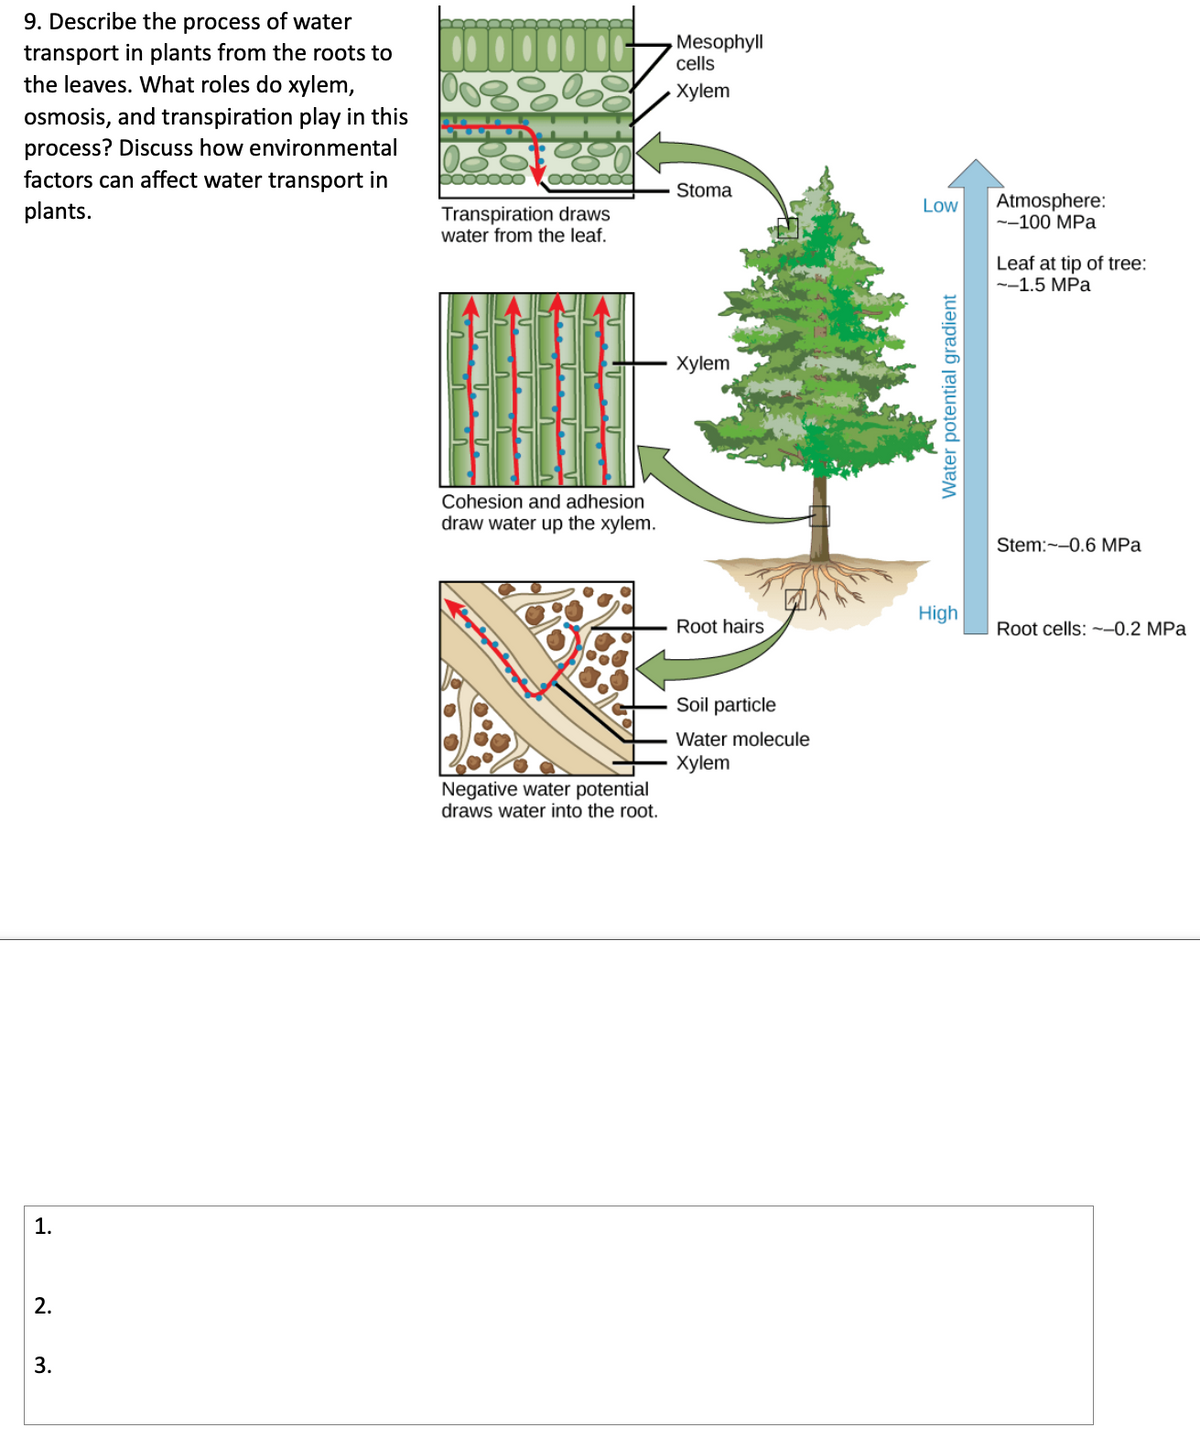 9. Describe the process of water
transport in plants from the roots to
the leaves. What roles do xylem,
osmosis, and transpiration play in this
process? Discuss how environmental
factors can affect water transport in
plants.
1.
2.
3.
0088
Doo
ooooooo
Transpiration draws
water from the leaf.
Cohesion and adhesion
draw water up the xylem.
Negative water potential
draws water into the root.
Mesophyll
cells
Xylem
Stoma
Xylem
Root hairs
Soil particle
Water molecule
Xylem
Low
Water potential gradient
High
Atmosphere:
--100 MPa
Leaf at tip of tree:
--1.5 MPa
Stem: -0.6 MPa
Root cells: -0.2 MPa